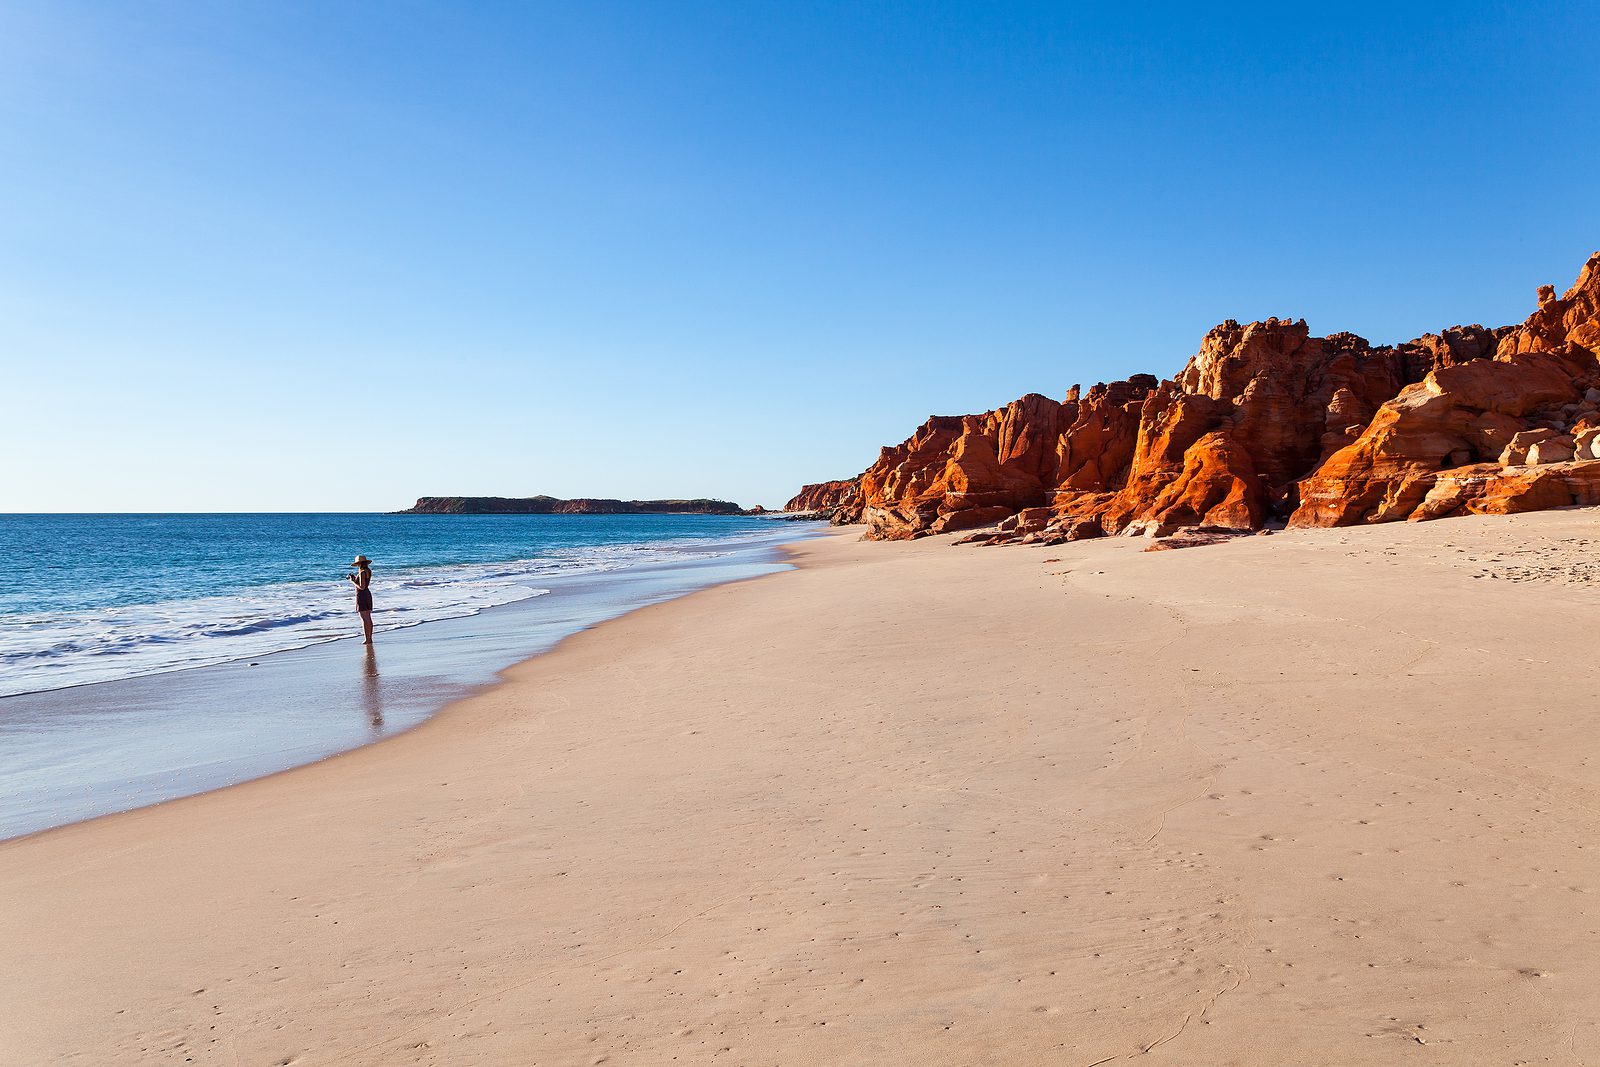 Cape Leveque is the northernmost tip of the Dampier Peninsula in the Kimberley region of Western Australia. Cape Leveque is 240 kilometres north of Broome.